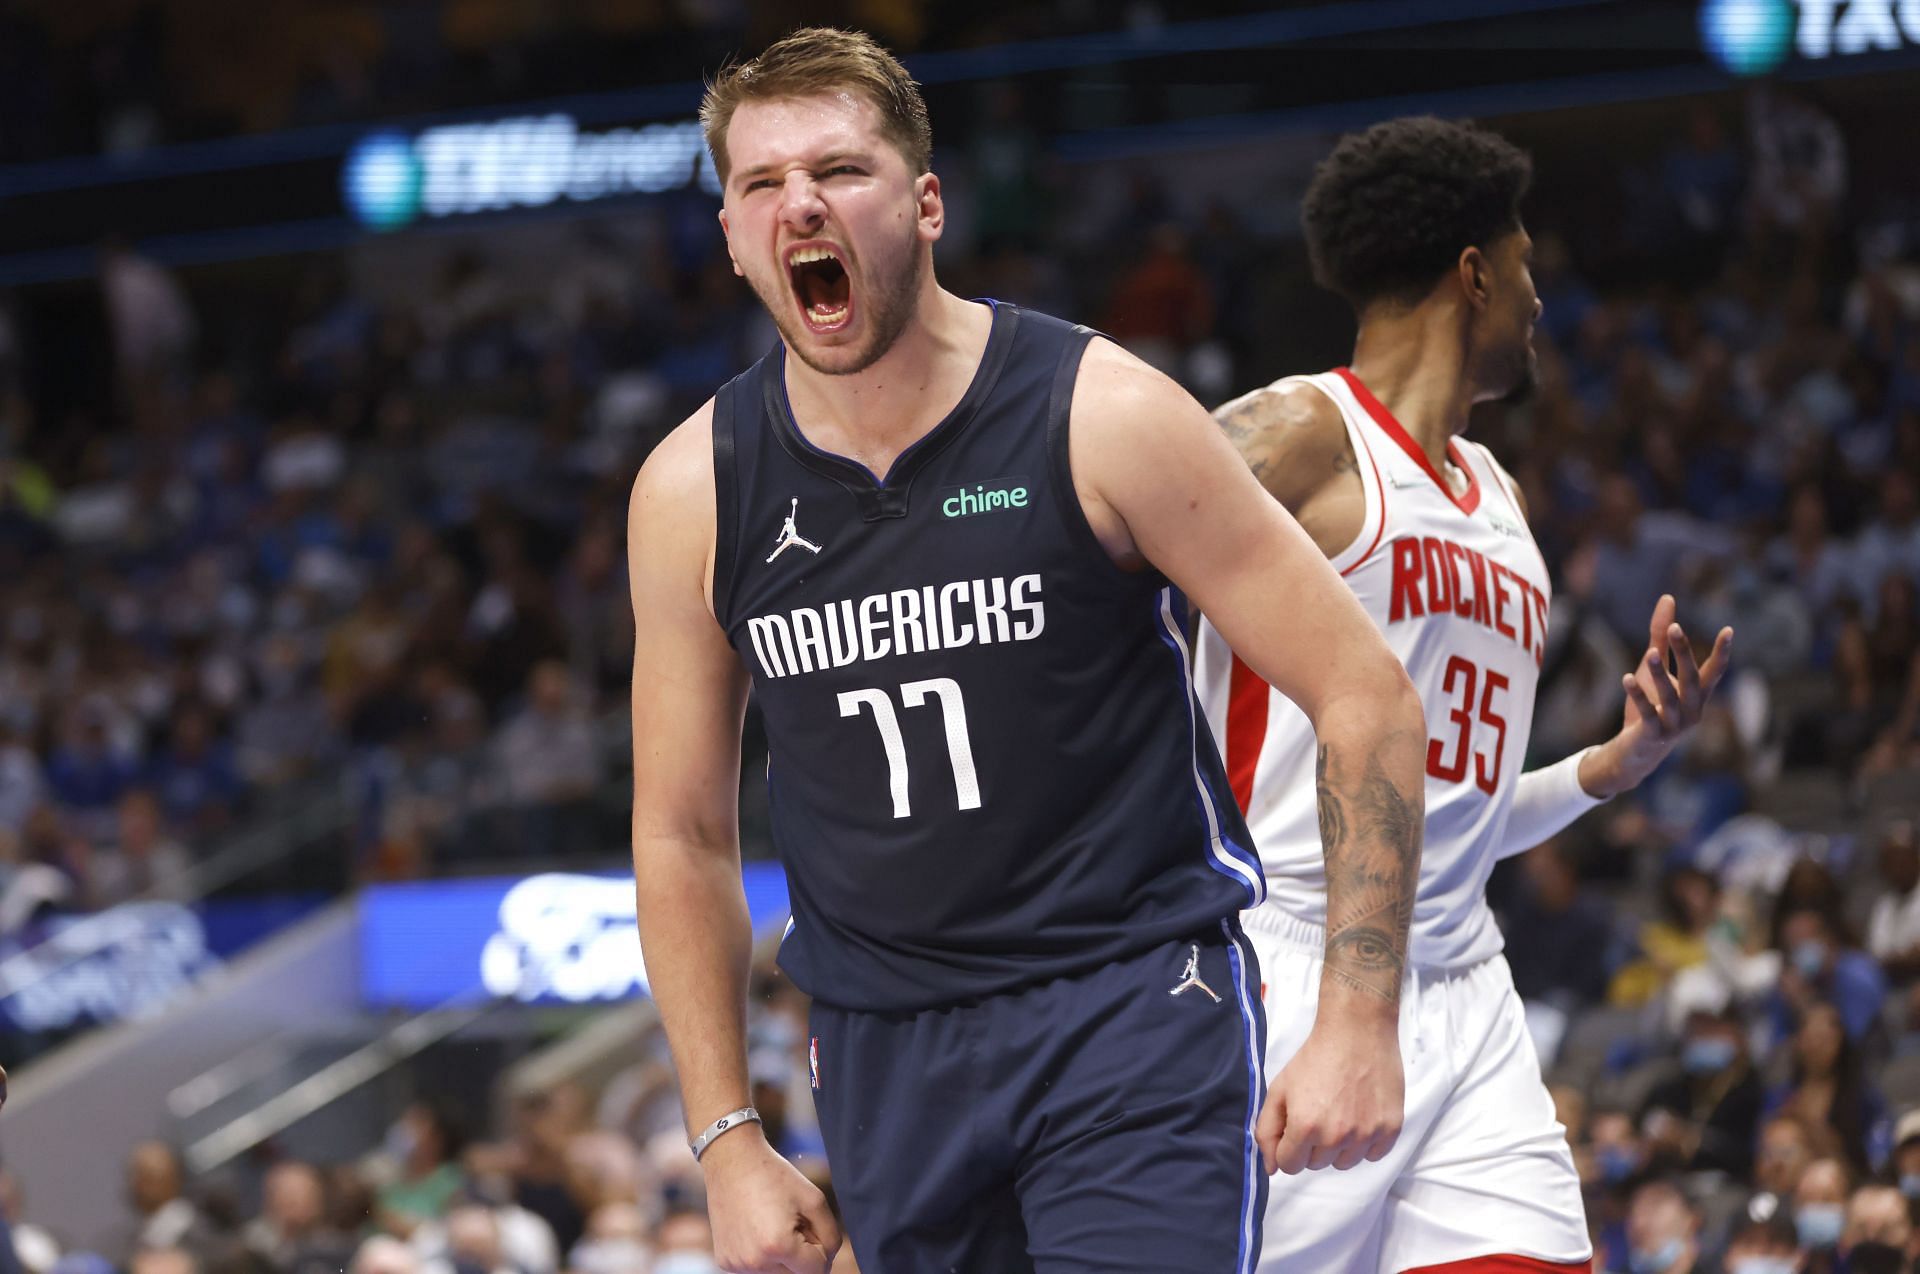 The Mavs are still searching for chemistry between Doncic and Porzingis.